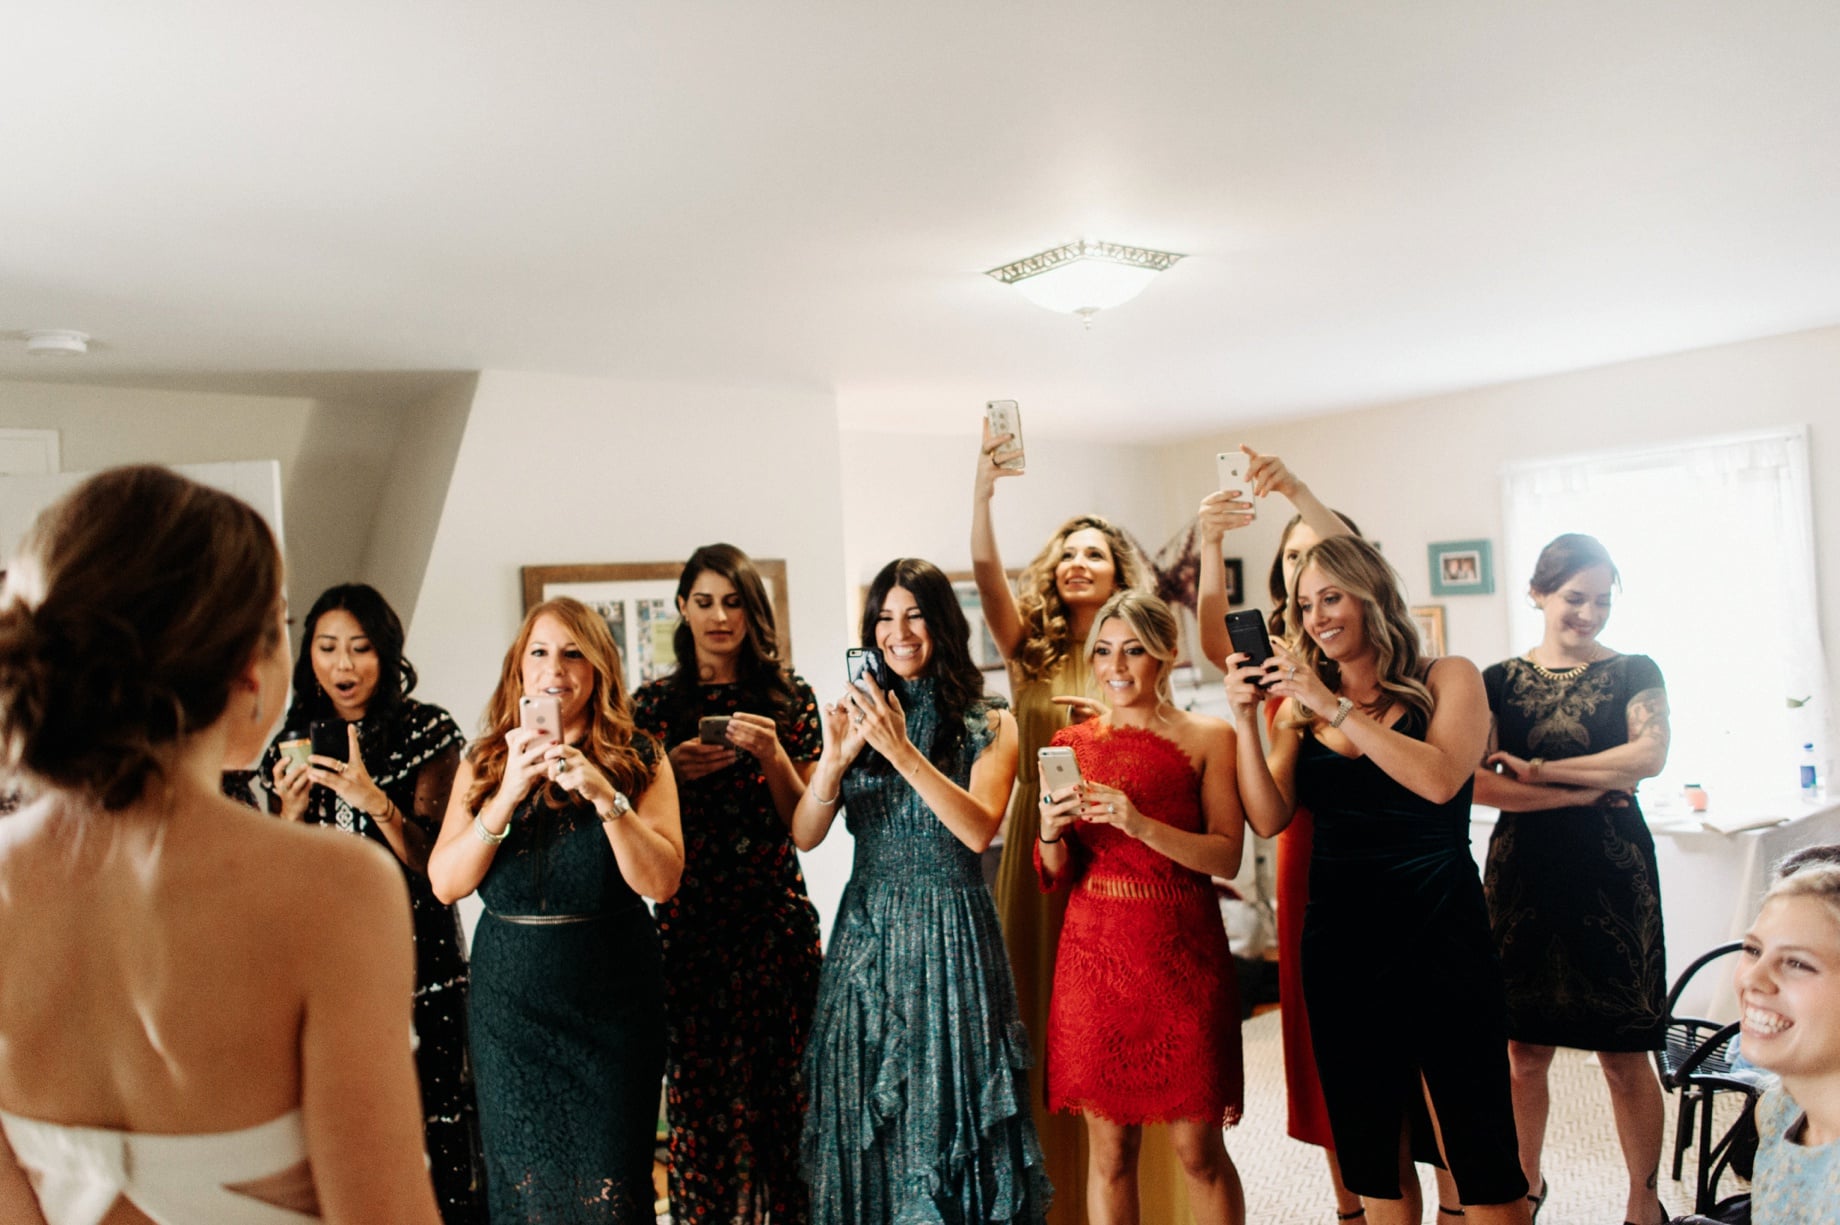 bridesmaids react to seeing bride in her dress for the first time